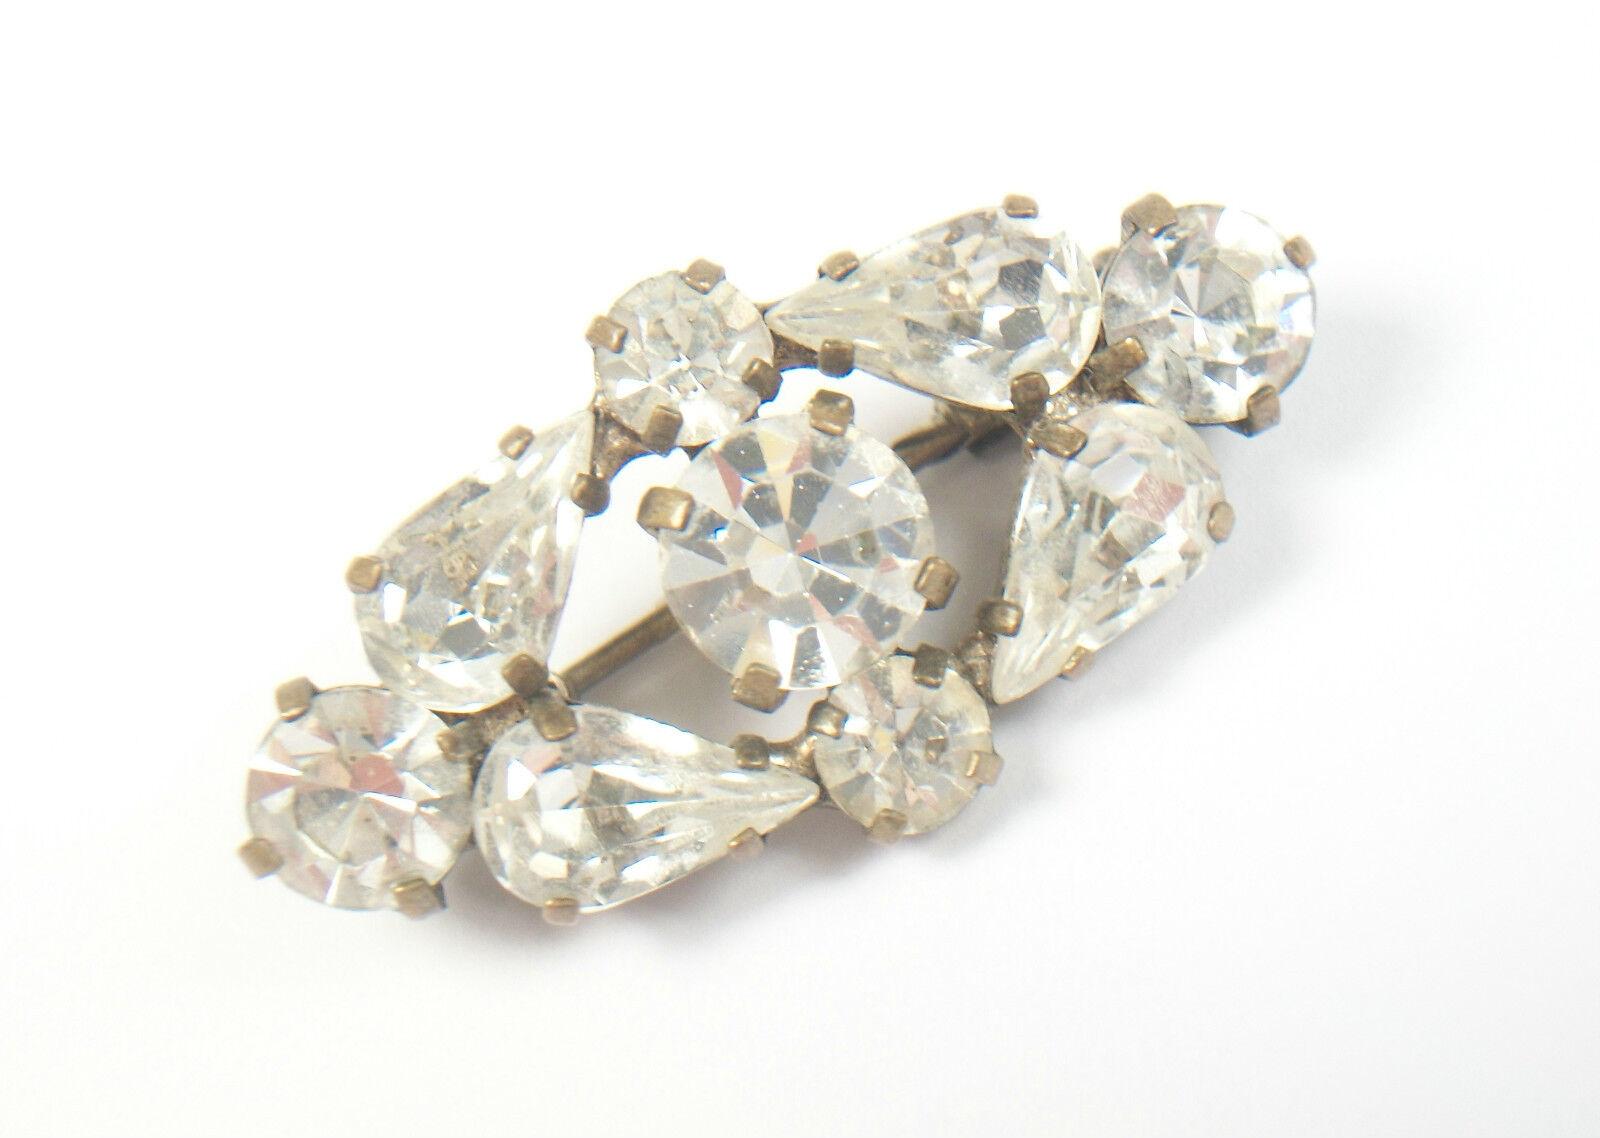 Vintage Rhinestone Brooch - Trombone Clasp - Unsigned - Circa 1950's In Good Condition For Sale In Chatham, CA